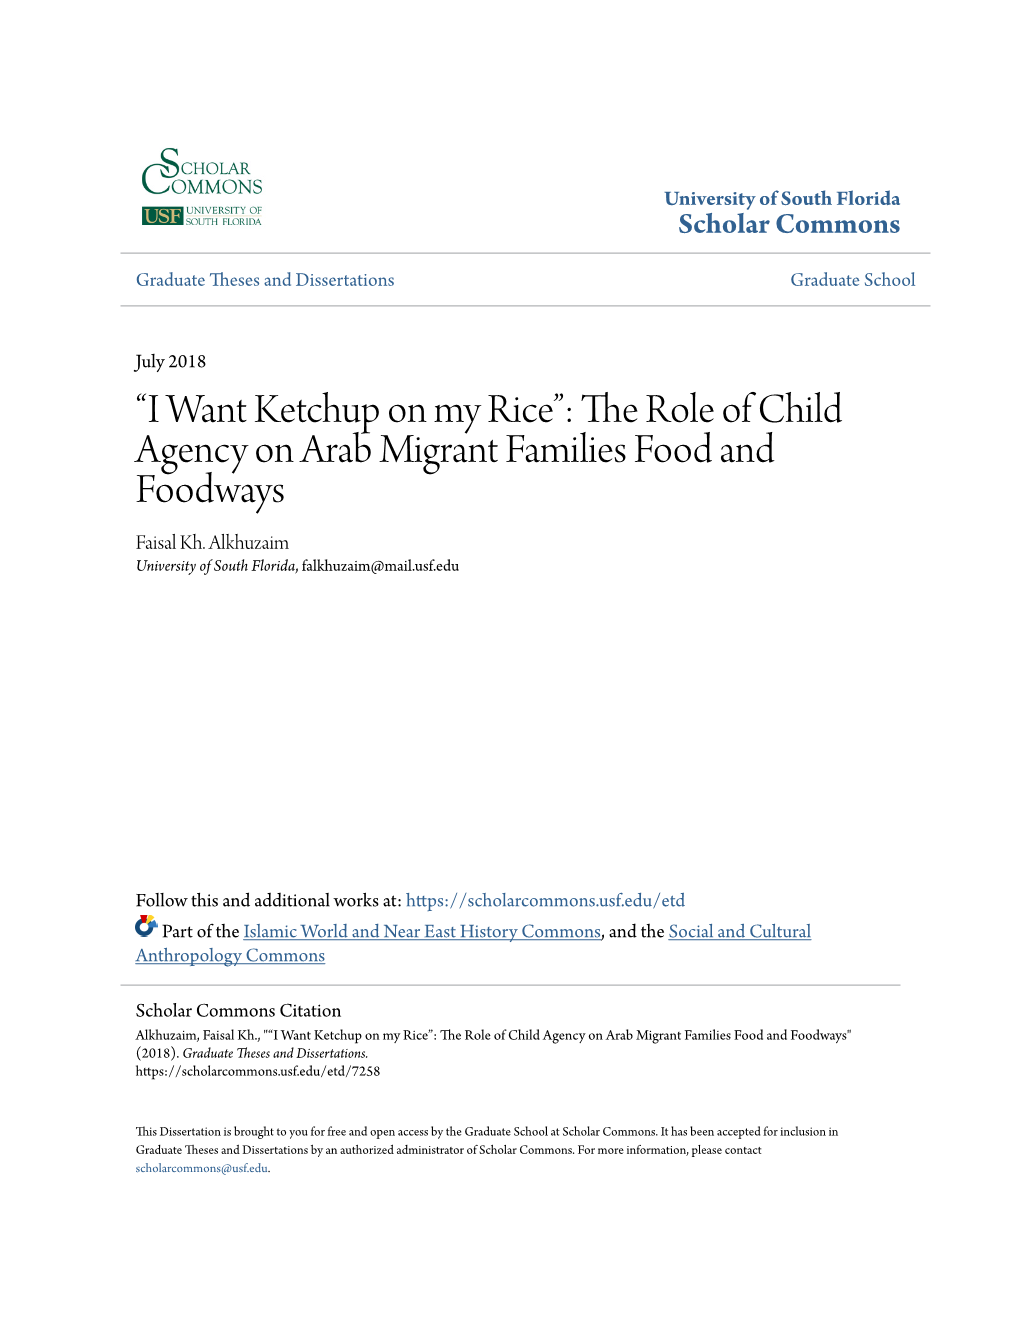 The Role of Child Agency on Arab Migrant Families Food and Foodways Faisal Kh